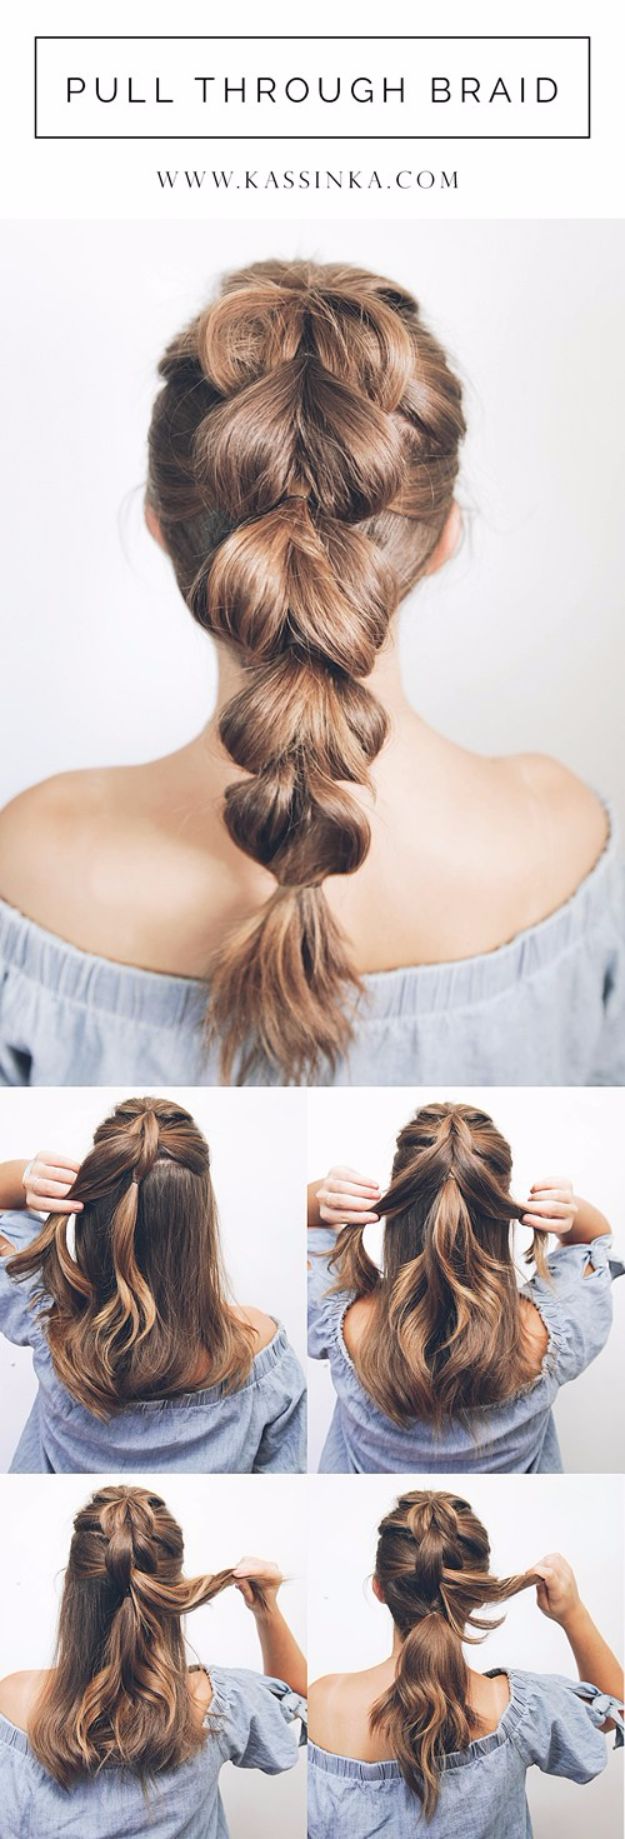 Cool Hair Tutorials for Summer - Pull Through Braid Tutorial - Easy Hairstyles and Creative Looks for Hair - Beachy Waves, Hair Styles for Short Hair, Medium Length and Long Hair - Ponytails, Updo Ideas and Quick Last Minute Hairstyle for Teens, Teenagers and Women 